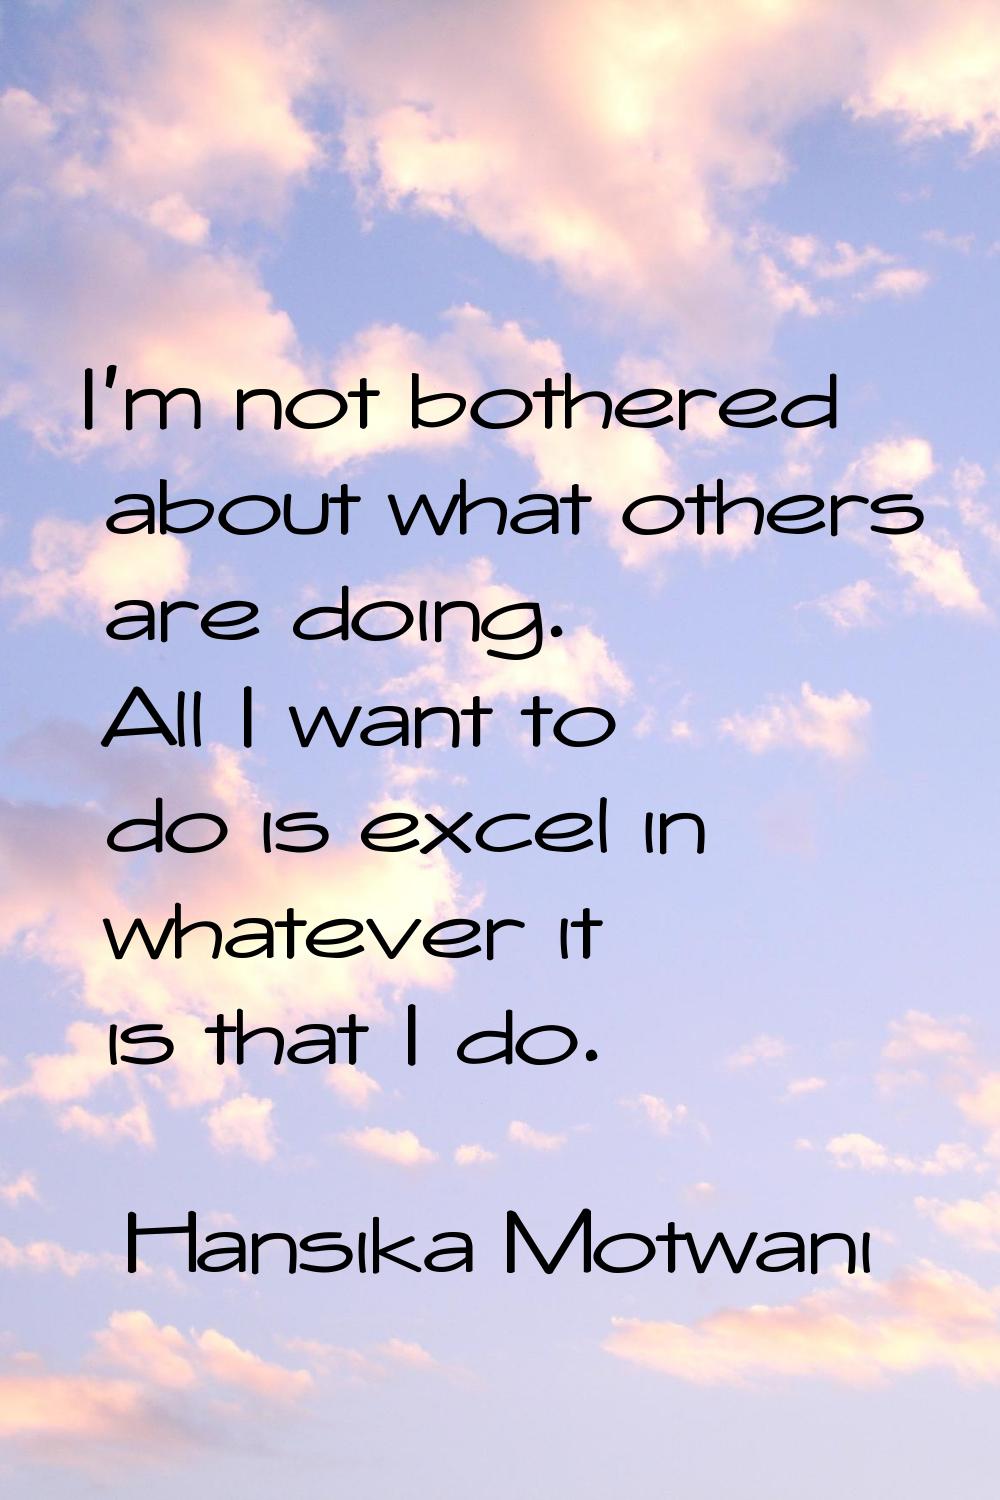 I'm not bothered about what others are doing. All I want to do is excel in whatever it is that I do